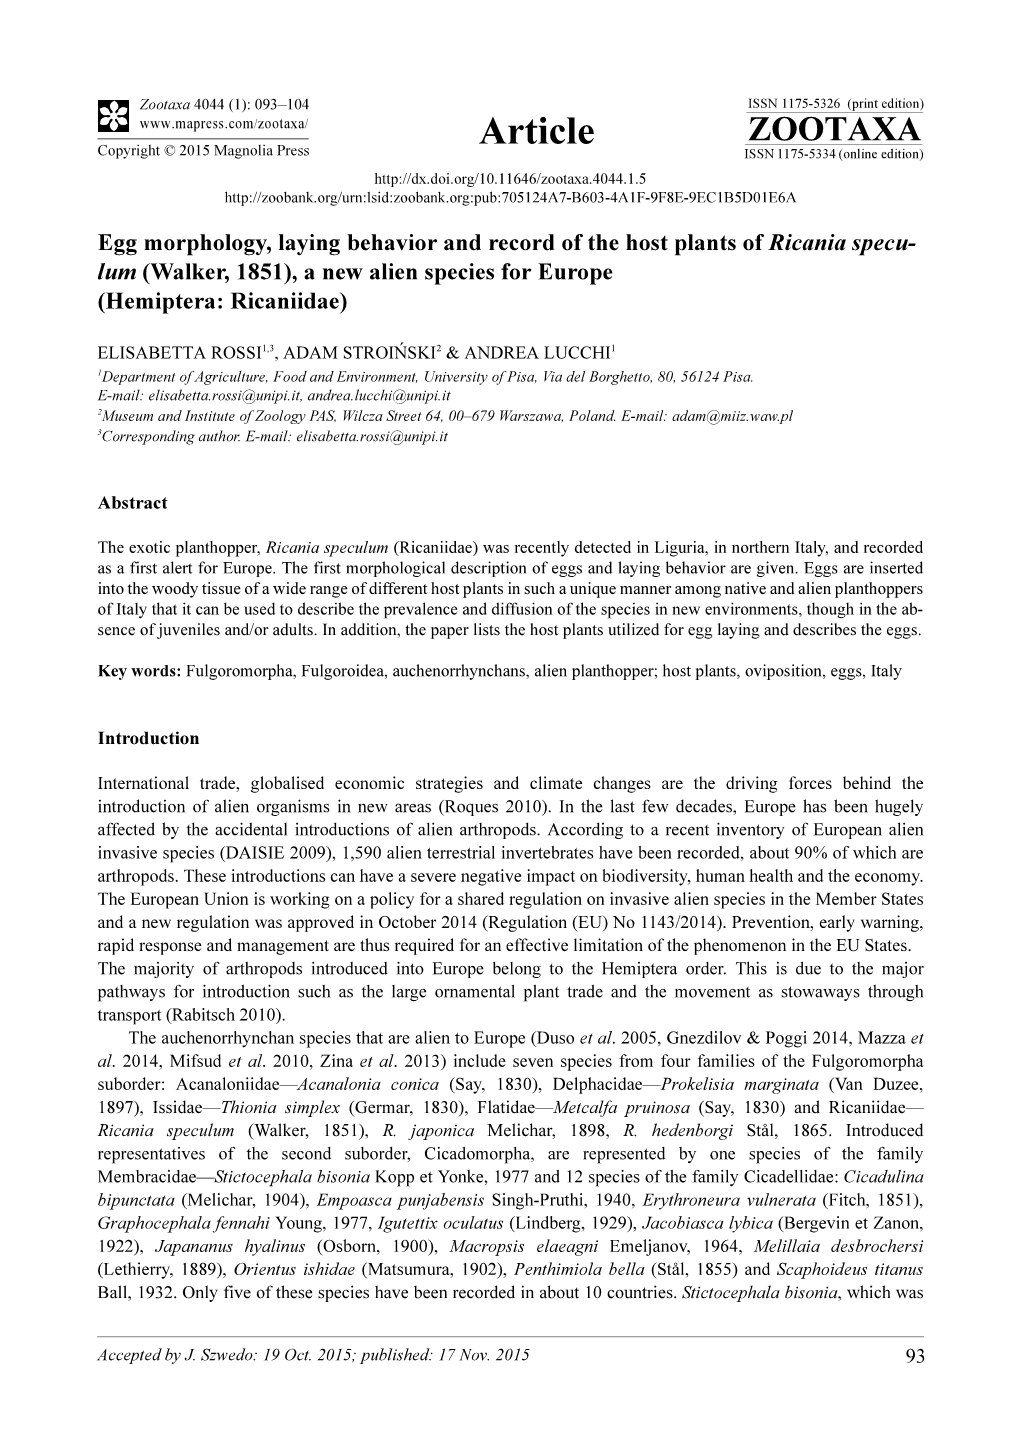 Egg Morphology, Laying Behavior and Record of the Host Plants of Ricania Speculum (Walker, 1851), a New Alien Species for Europe